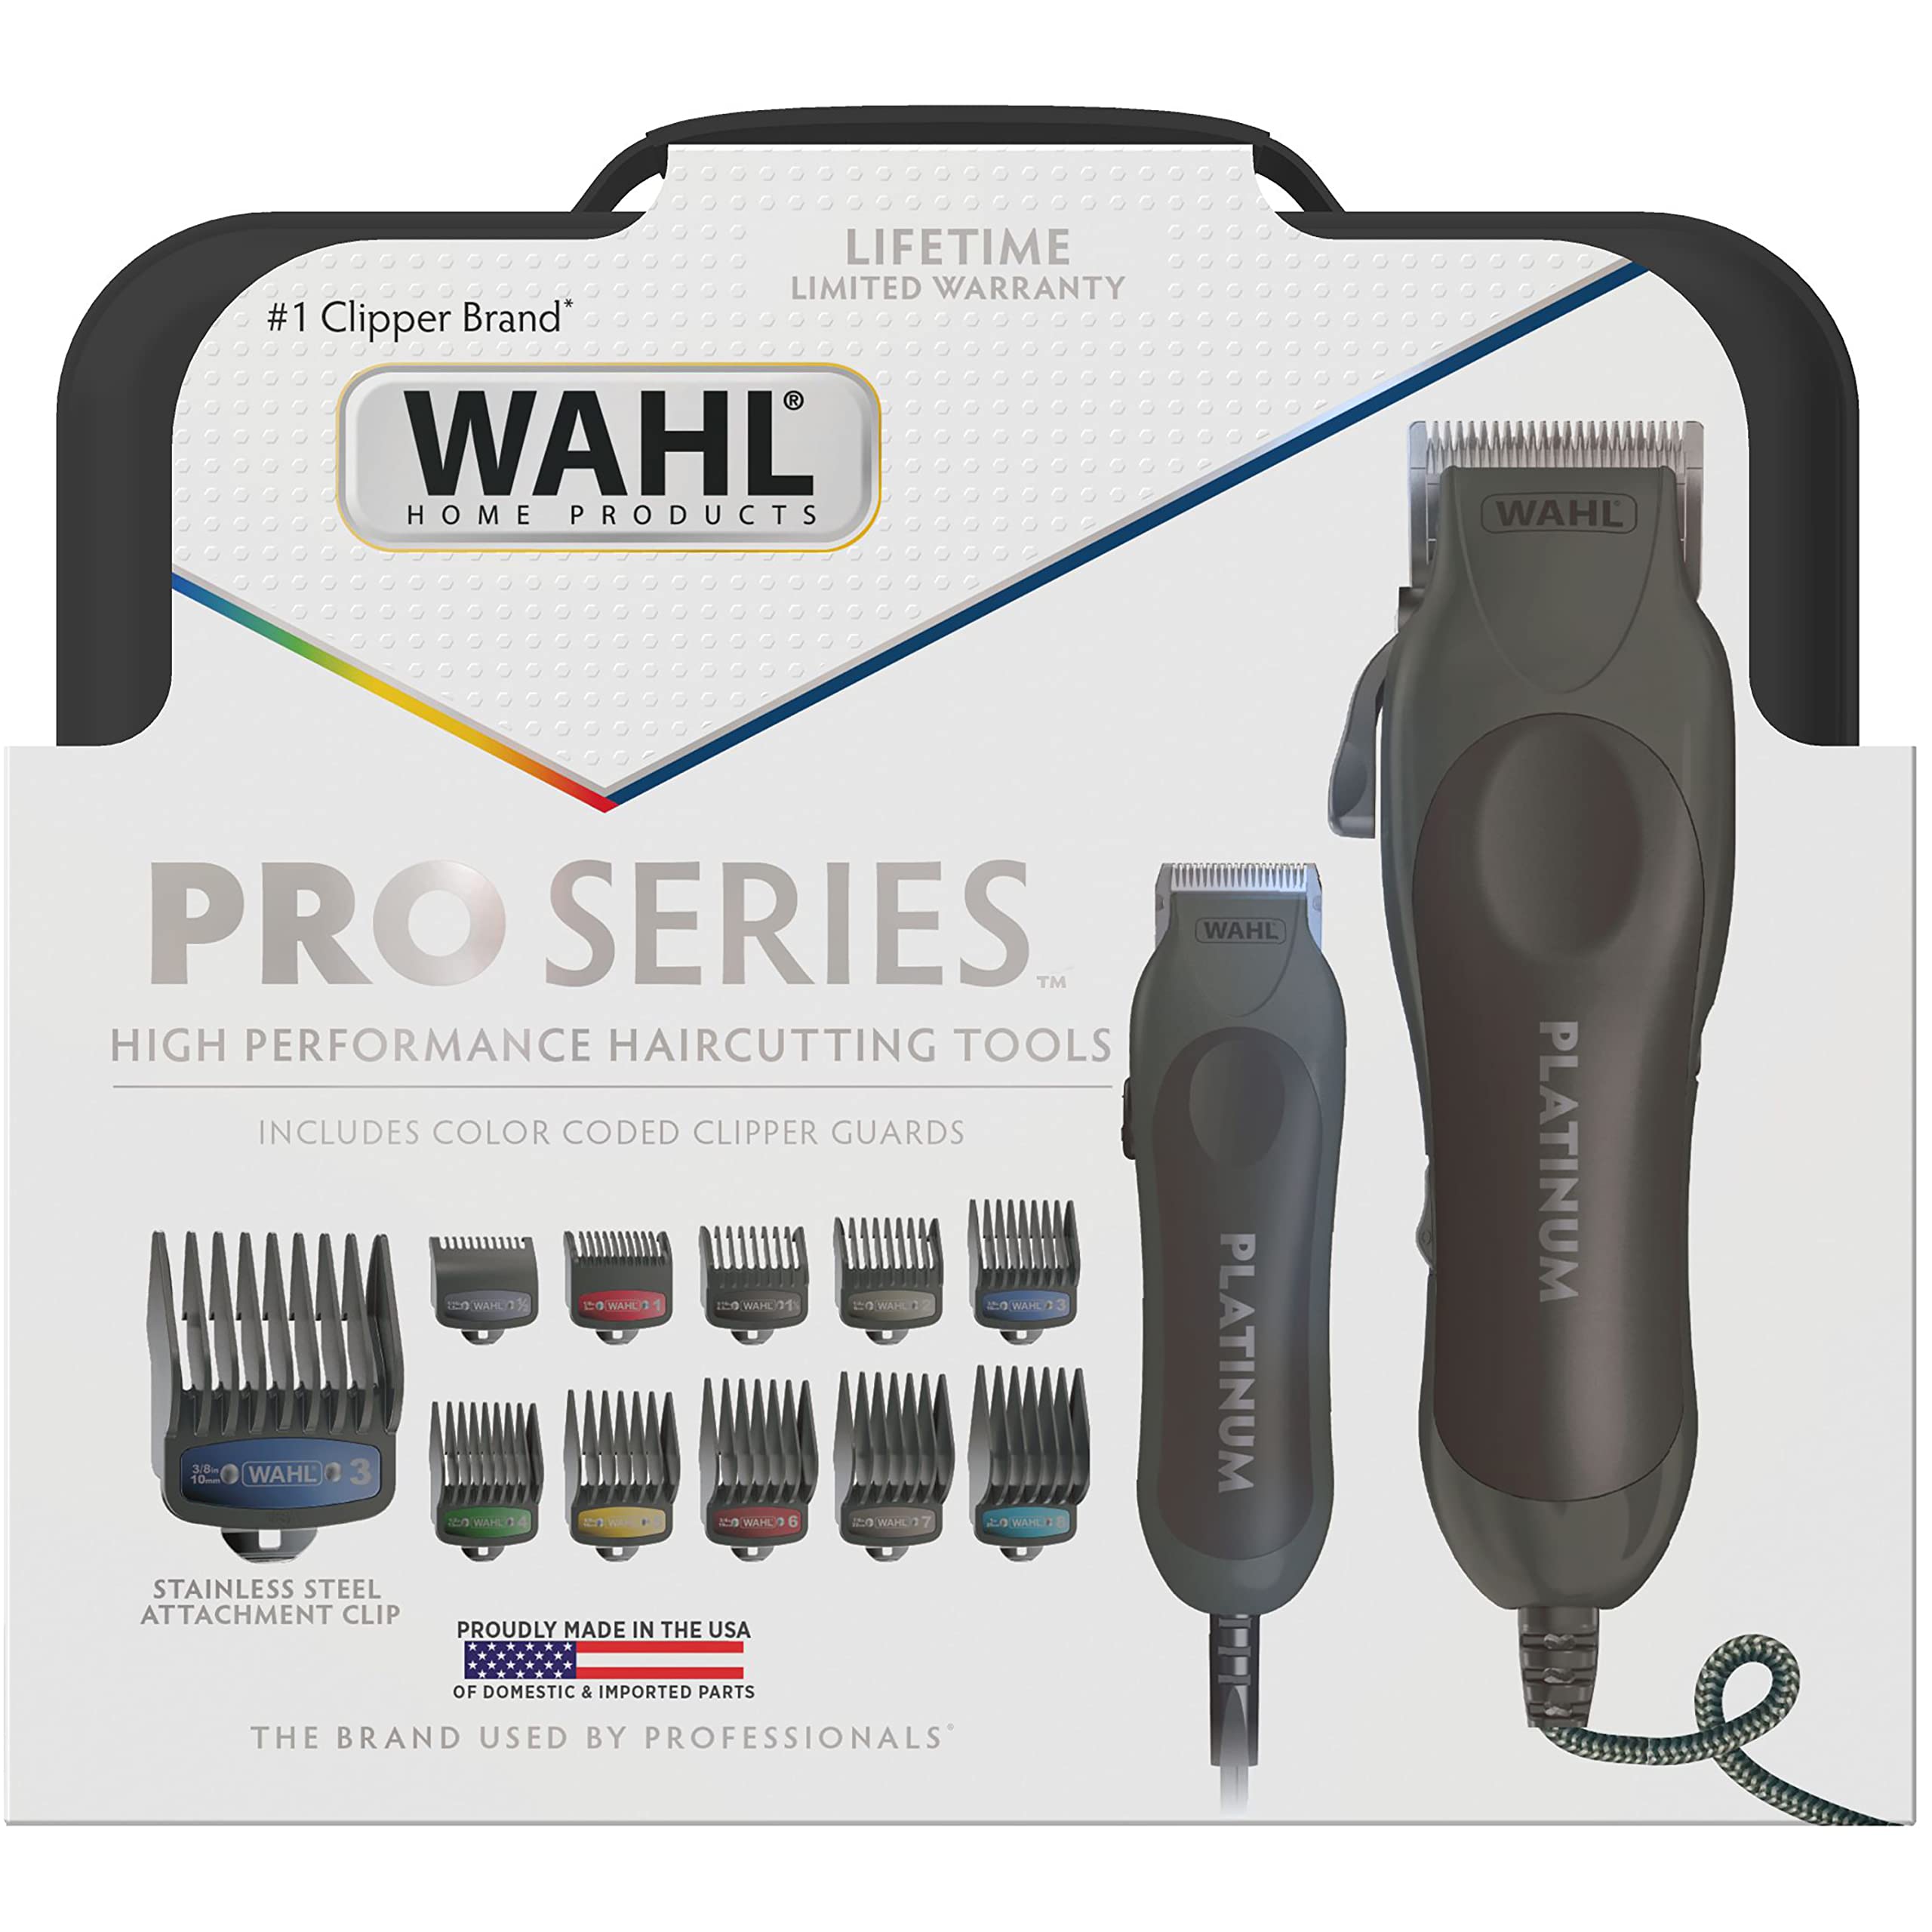 Wahl USA Pro Series Platinum Corded Clipper & Corded Trimmer for Home Haircutting with Premium Secure Fit Color Coded Guide Combs – Model 79804-100